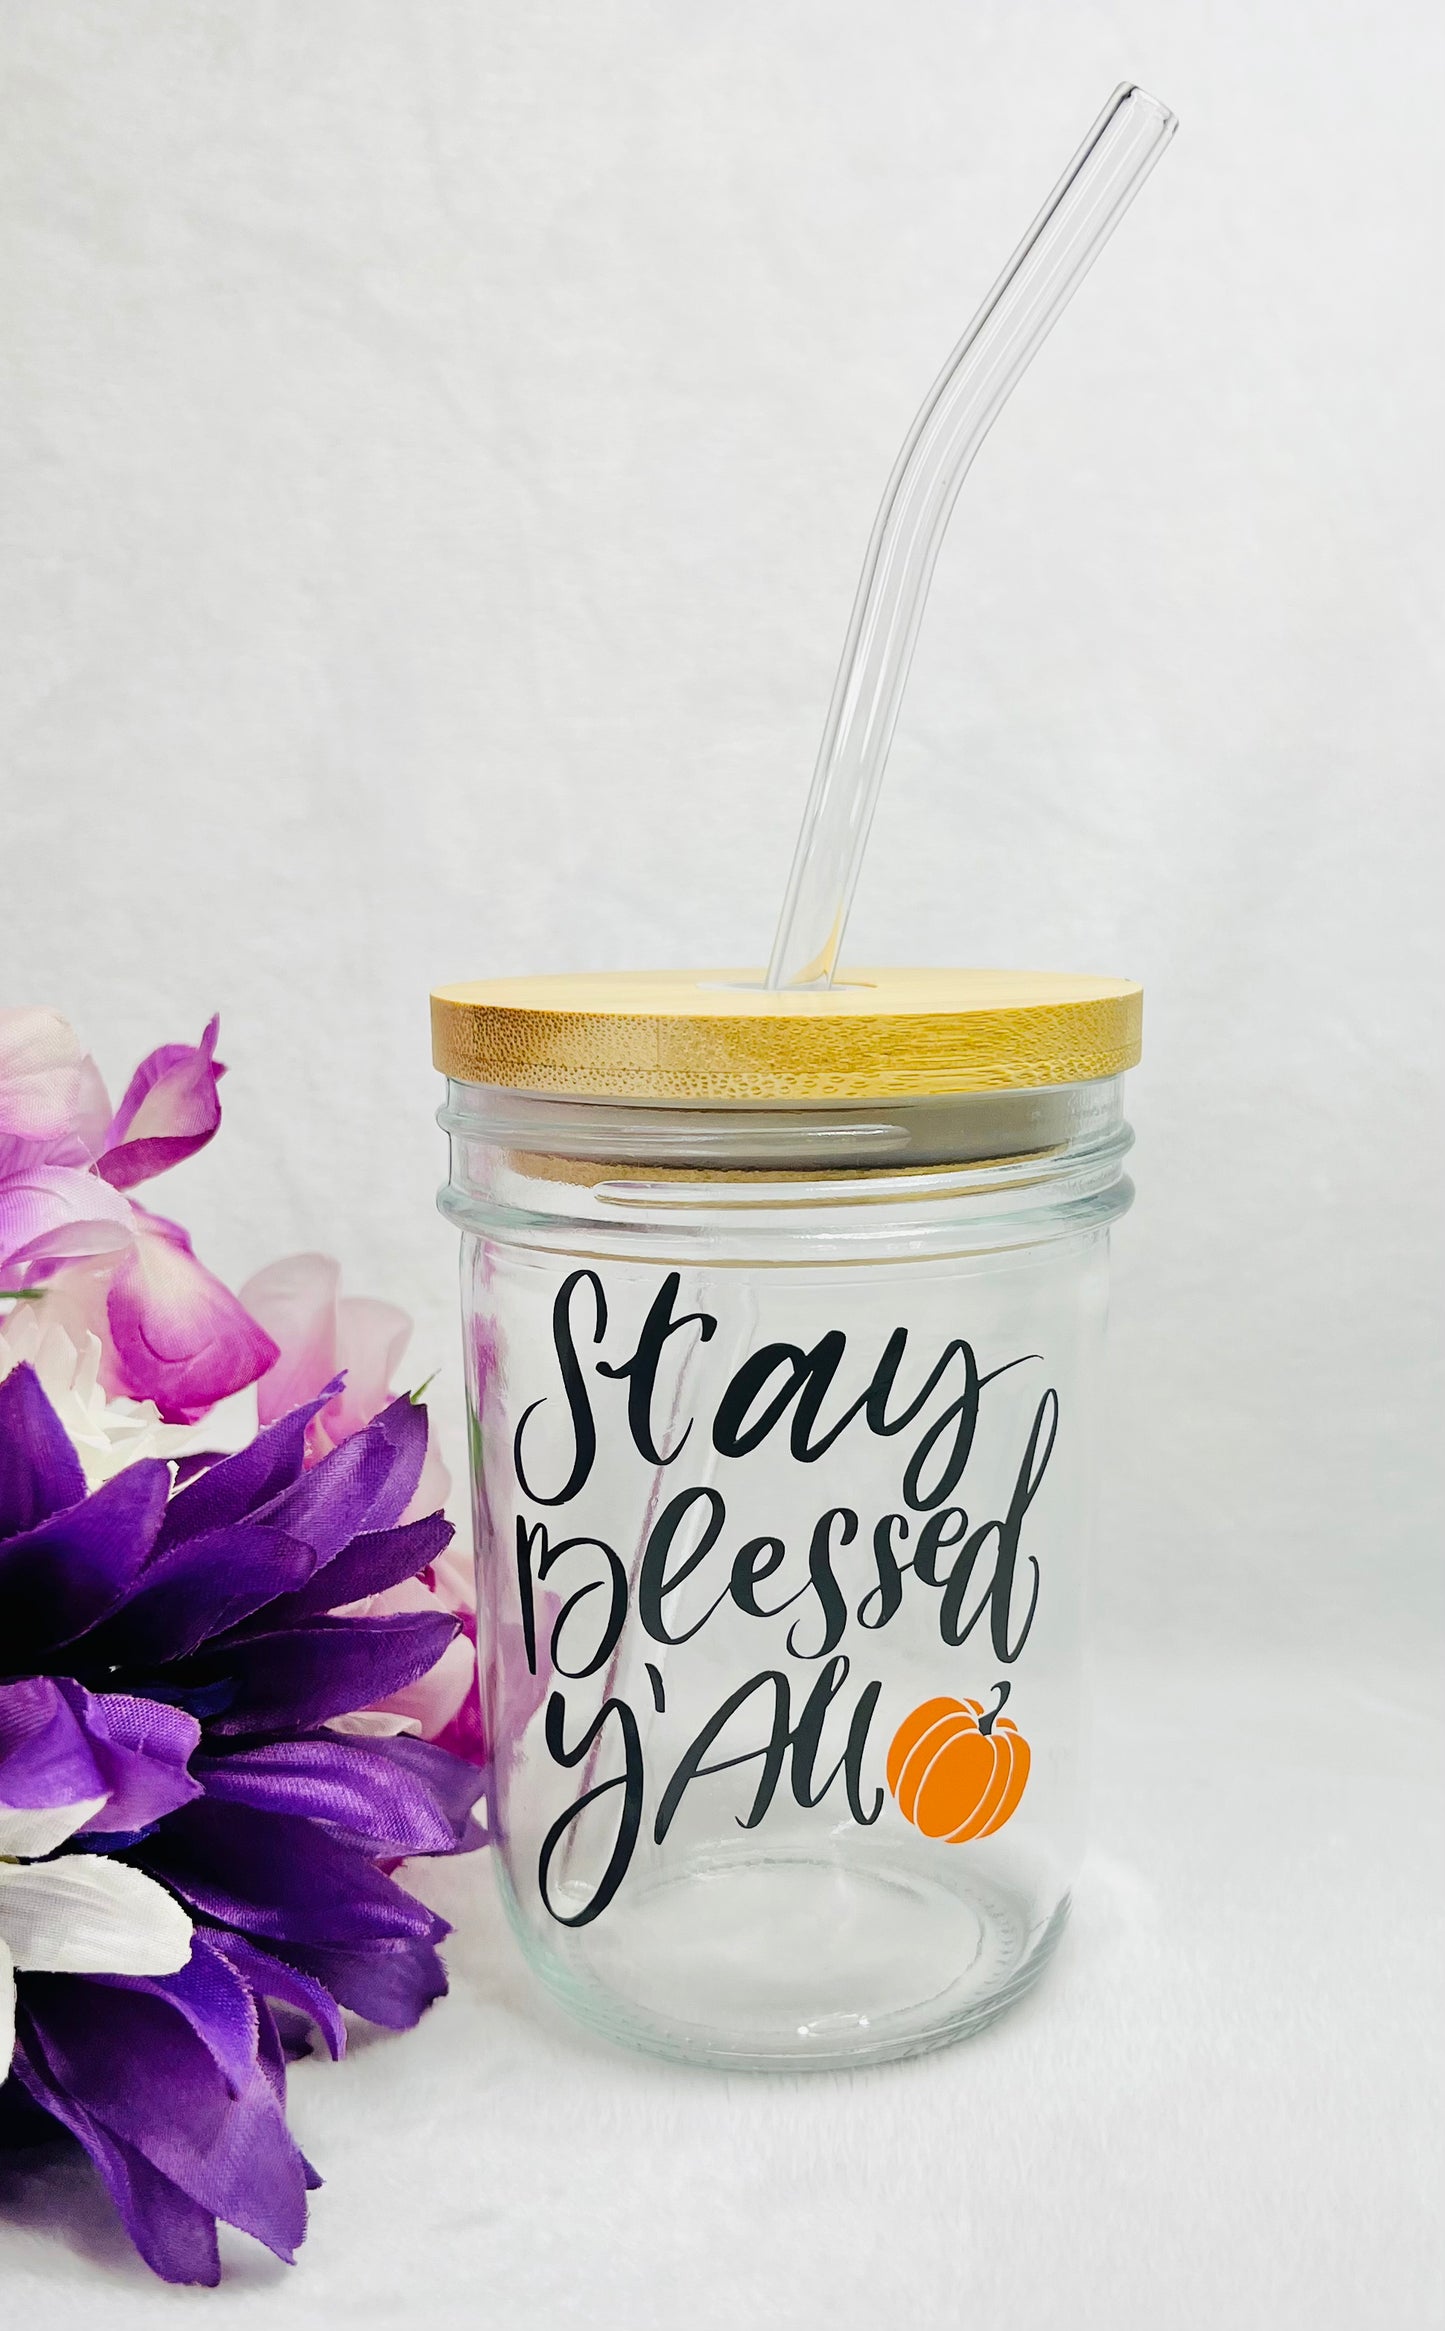 16 ounce Stay Blessed Y’all Glass Mason Jar